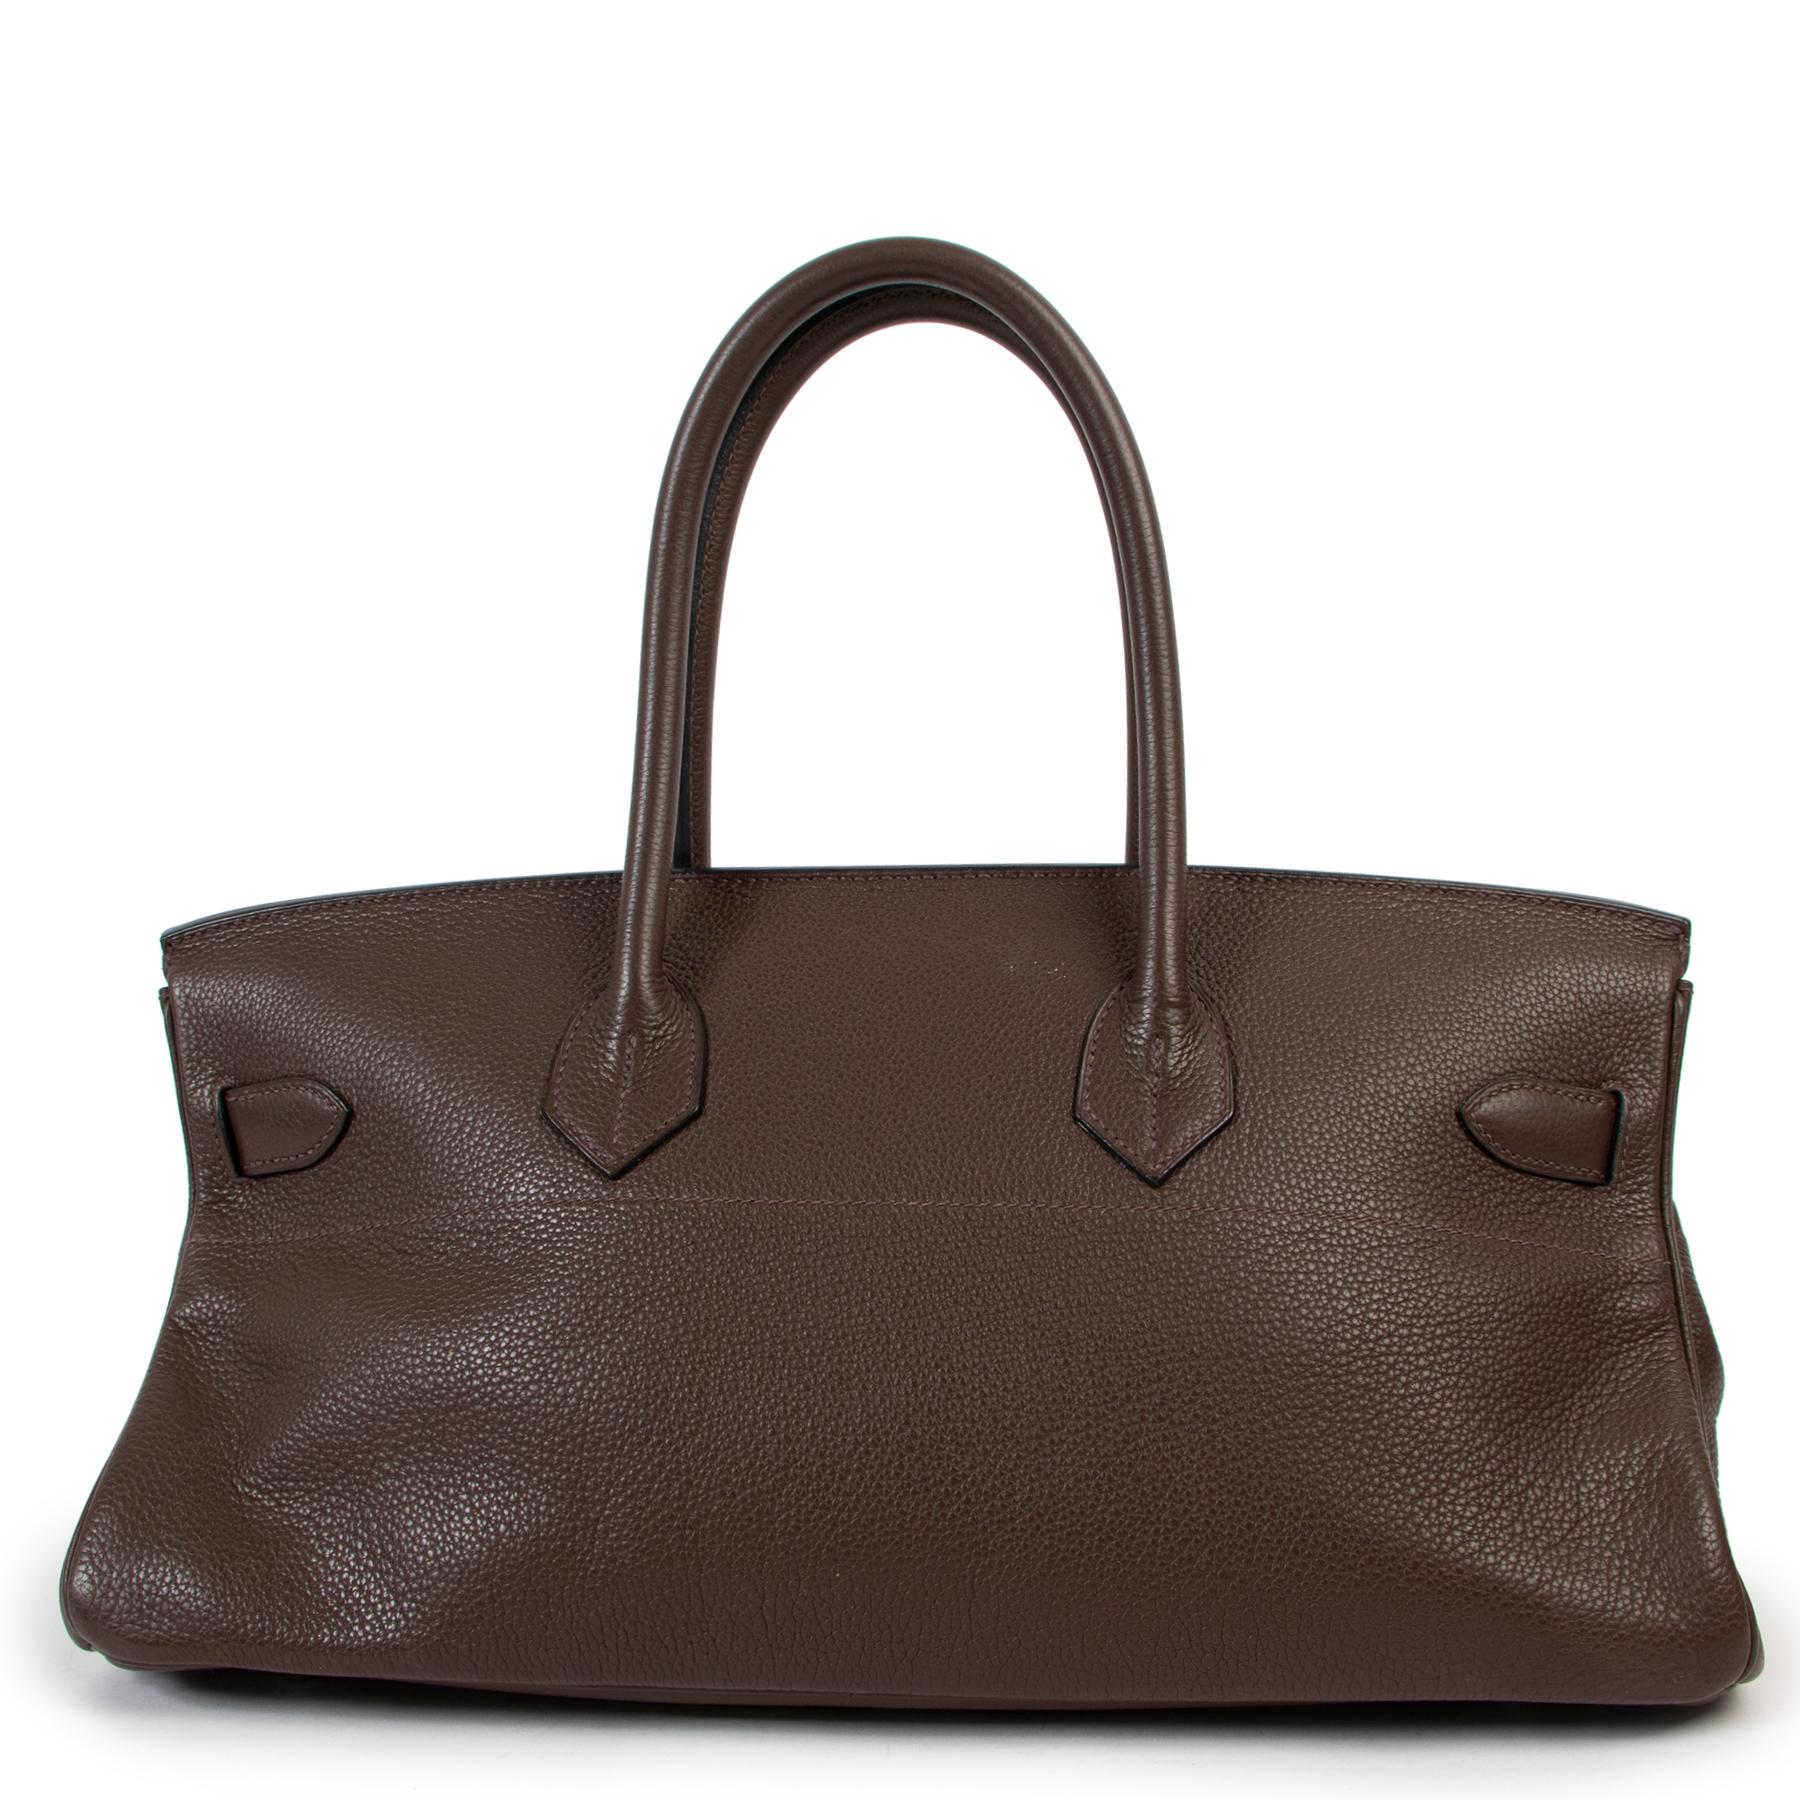 Hermès JPG Shoulder Birkin 42 Chocolat Togo PHW

Sold out worldwide! One of the most iconic bags, the Hermès Shoulder Birkin 42 will make a stand-out addition to your bag collection. Impeccably crafted from durable Togo leather and paired with